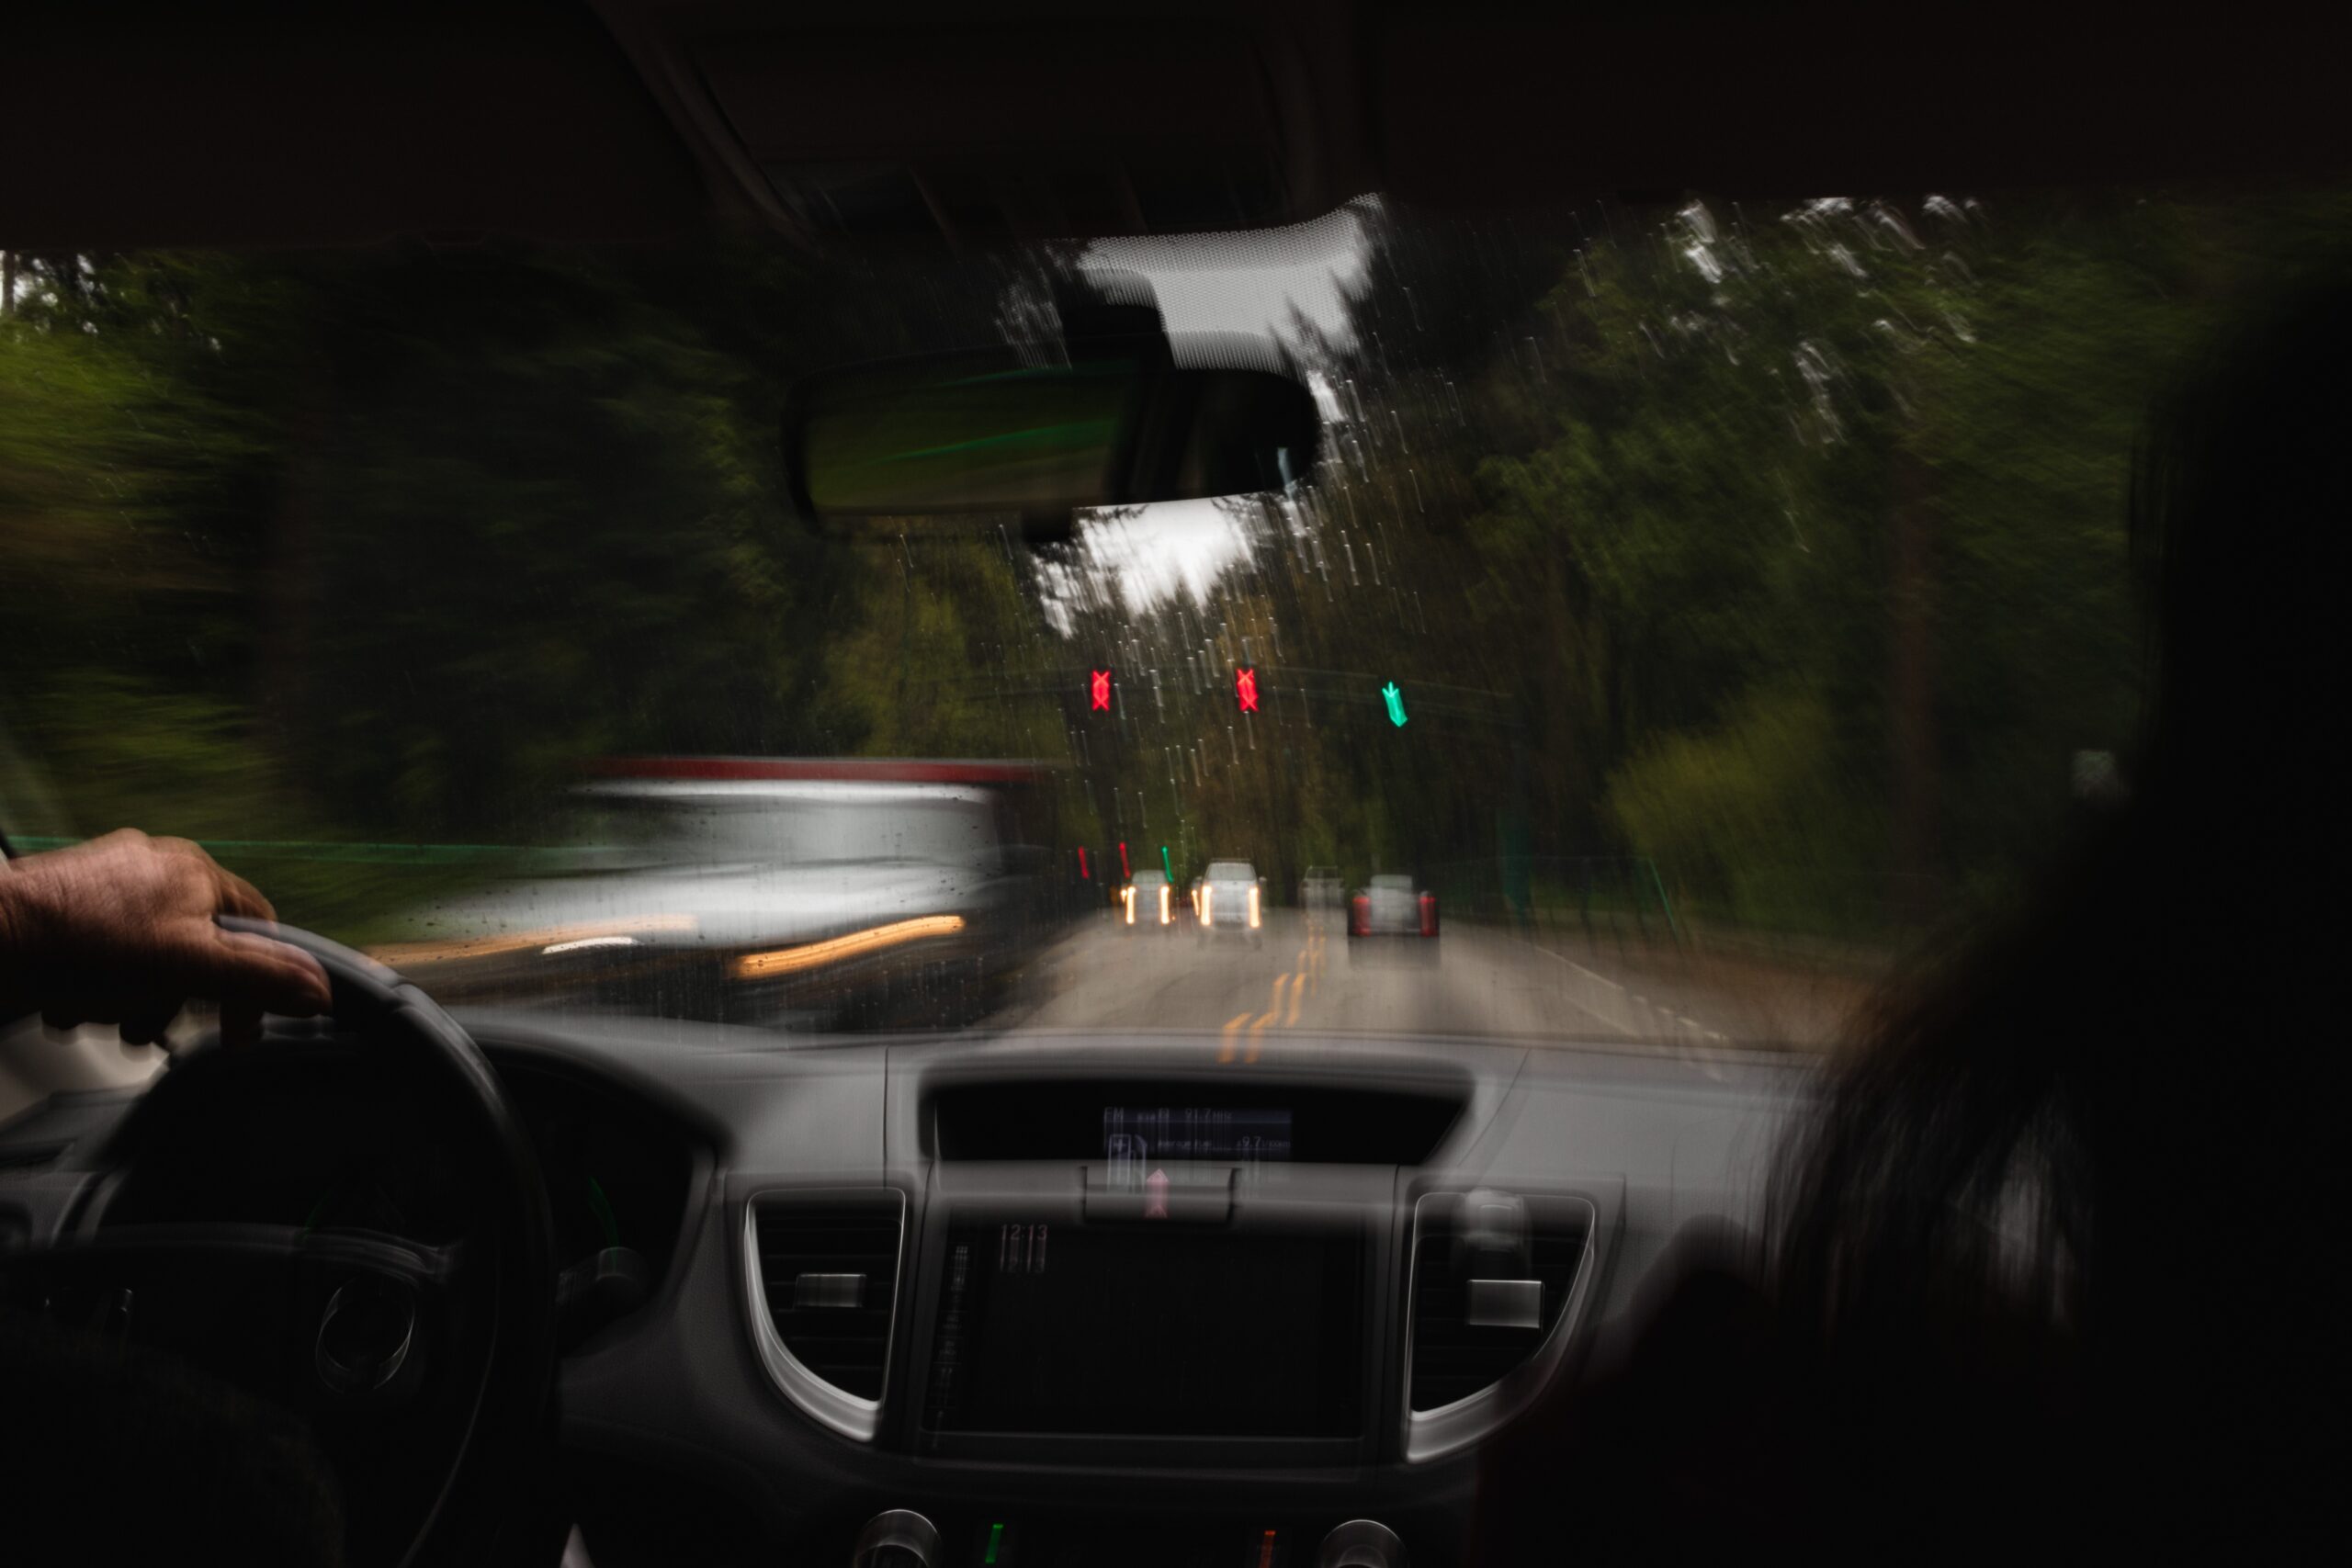 Blurry image of person driving car representing driving under the influence